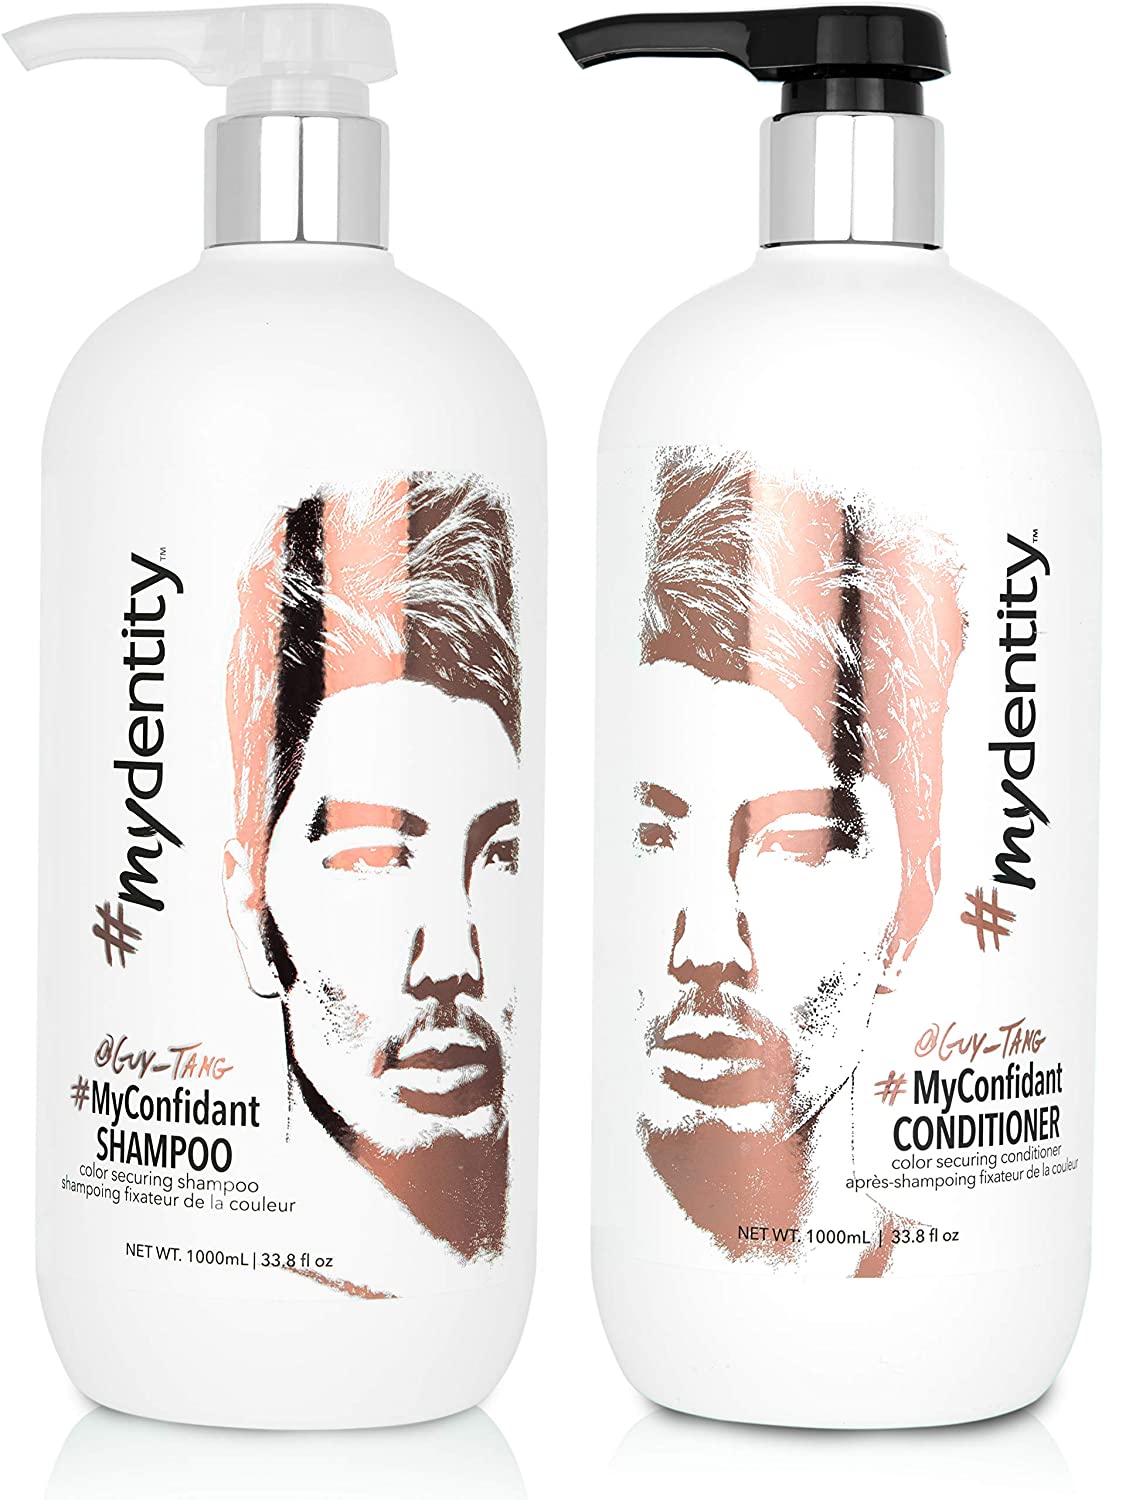 ''Guy Tang #mydentity #MyConfidant Color Securing SHAMPOO and Conditioner Duo Set, 33.79-Ounce''